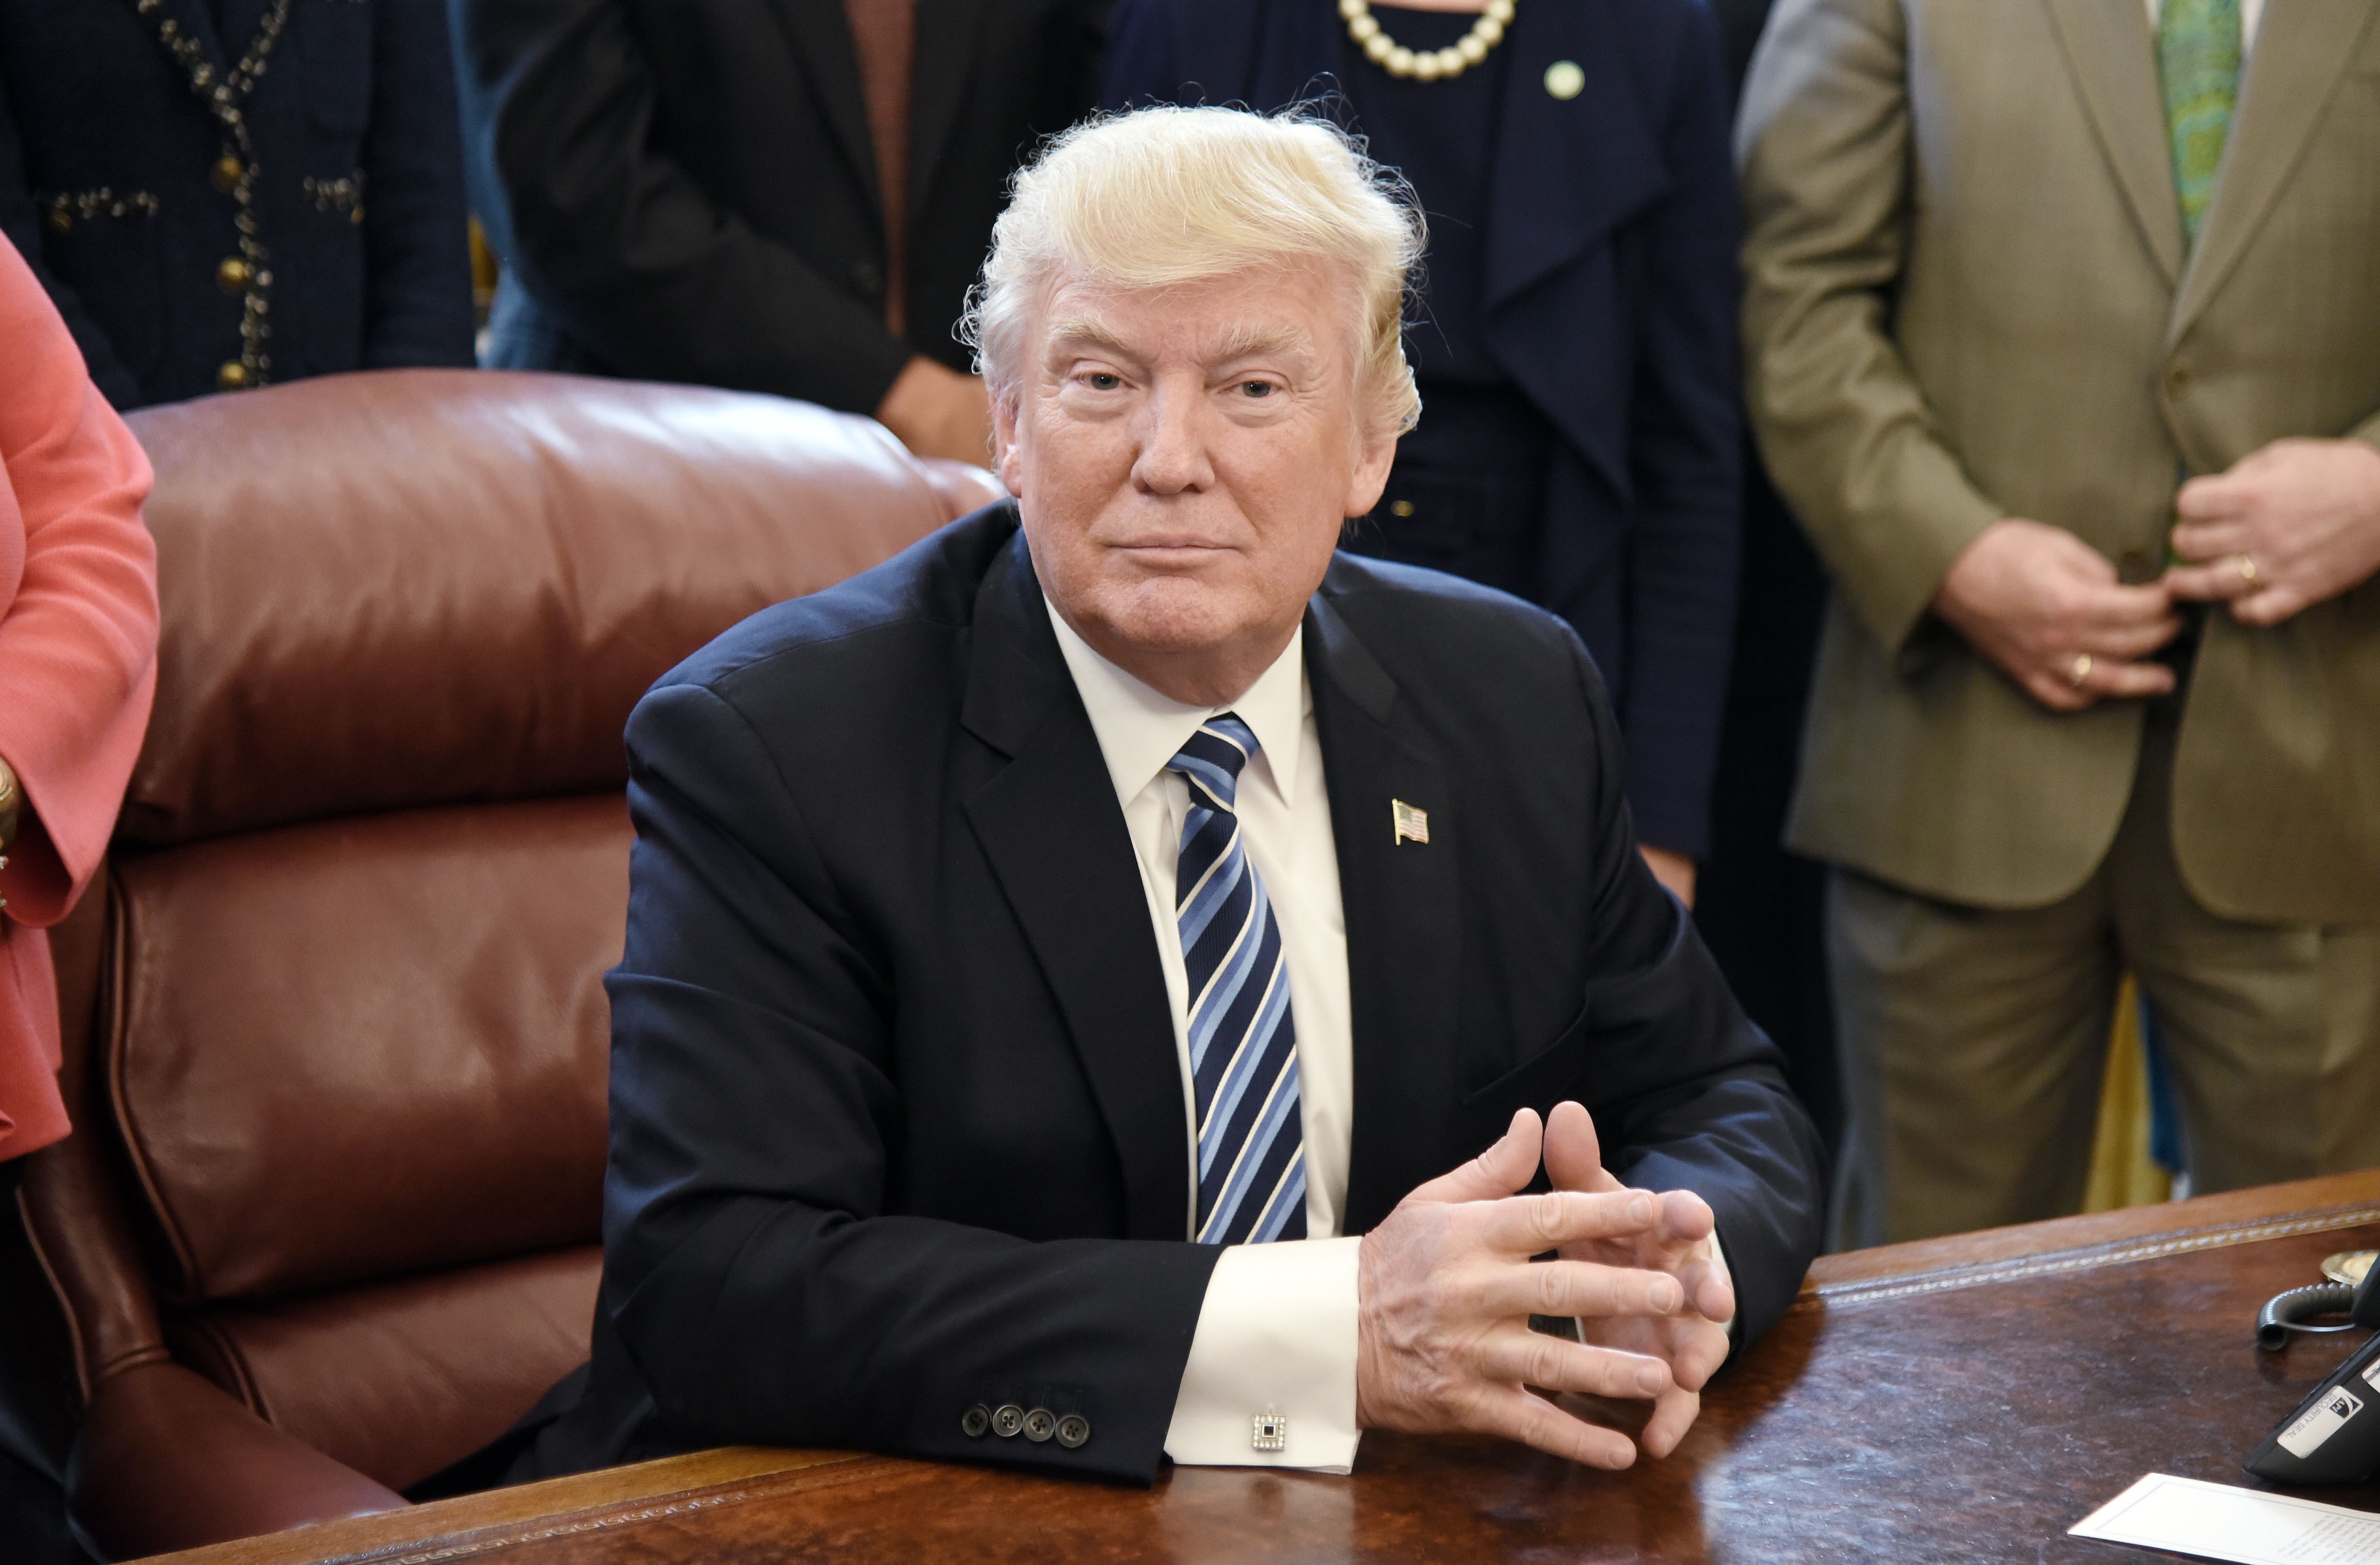 U.S. President Donald Trump looks on after signing a Memorandum on Aluminum Imports and Threats to National Security in the Oval Office on April 27, 2017 in Washington, DC. (Olivier Douliery—Pool/Getty Images)